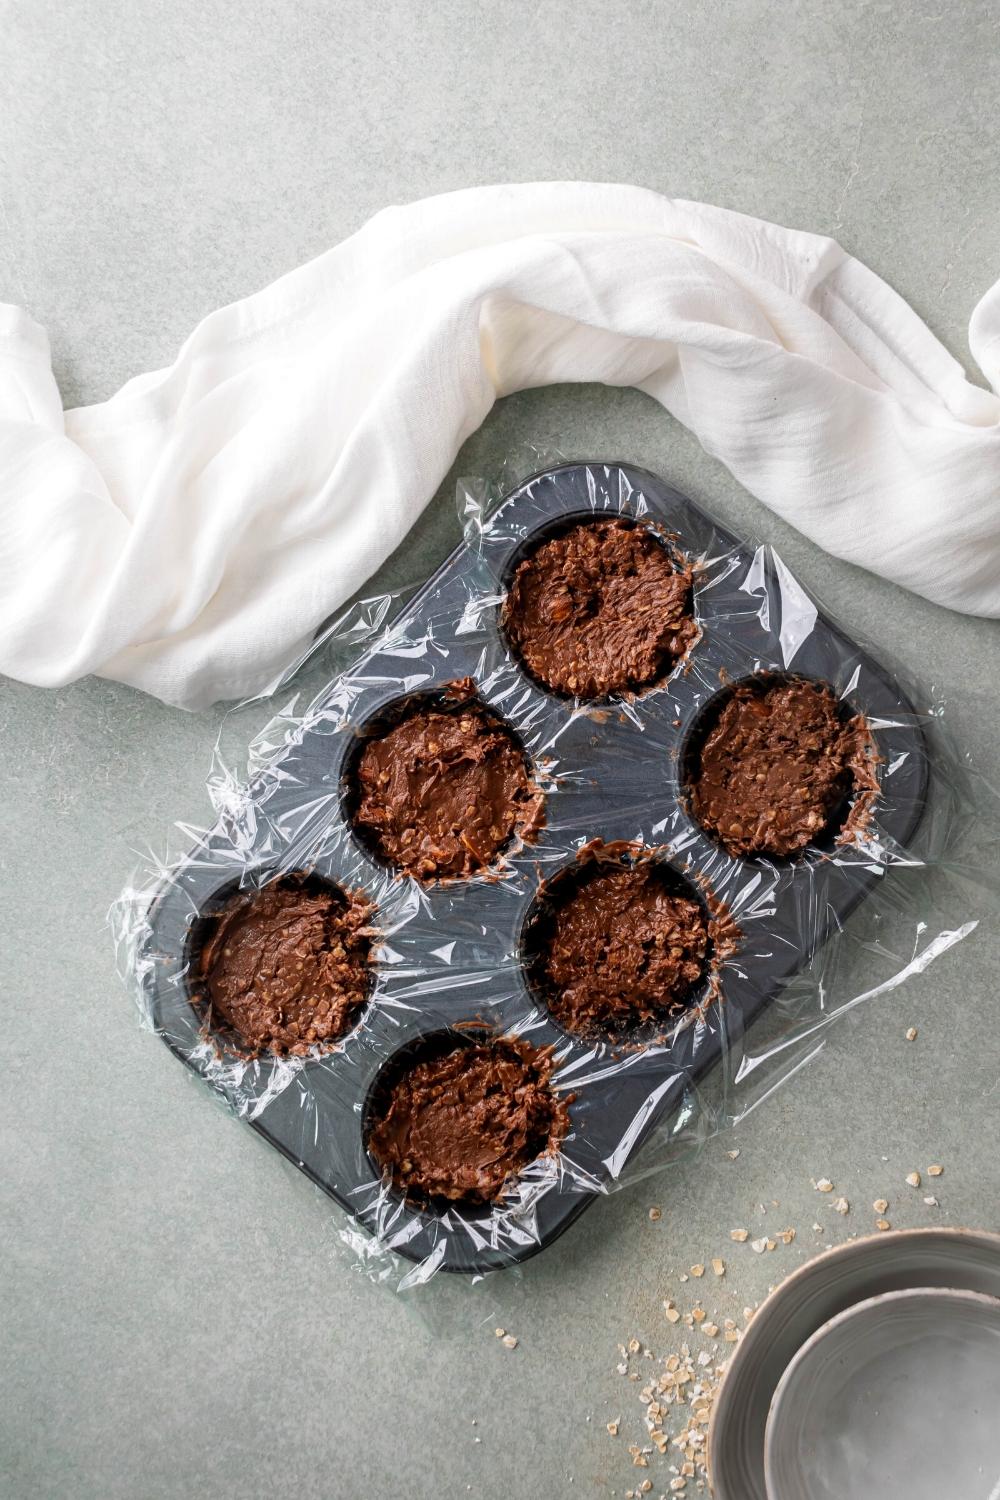 A six slotted mini muffin pan line with plastic wrap filled with no bake chocolate oatmeal cookies.